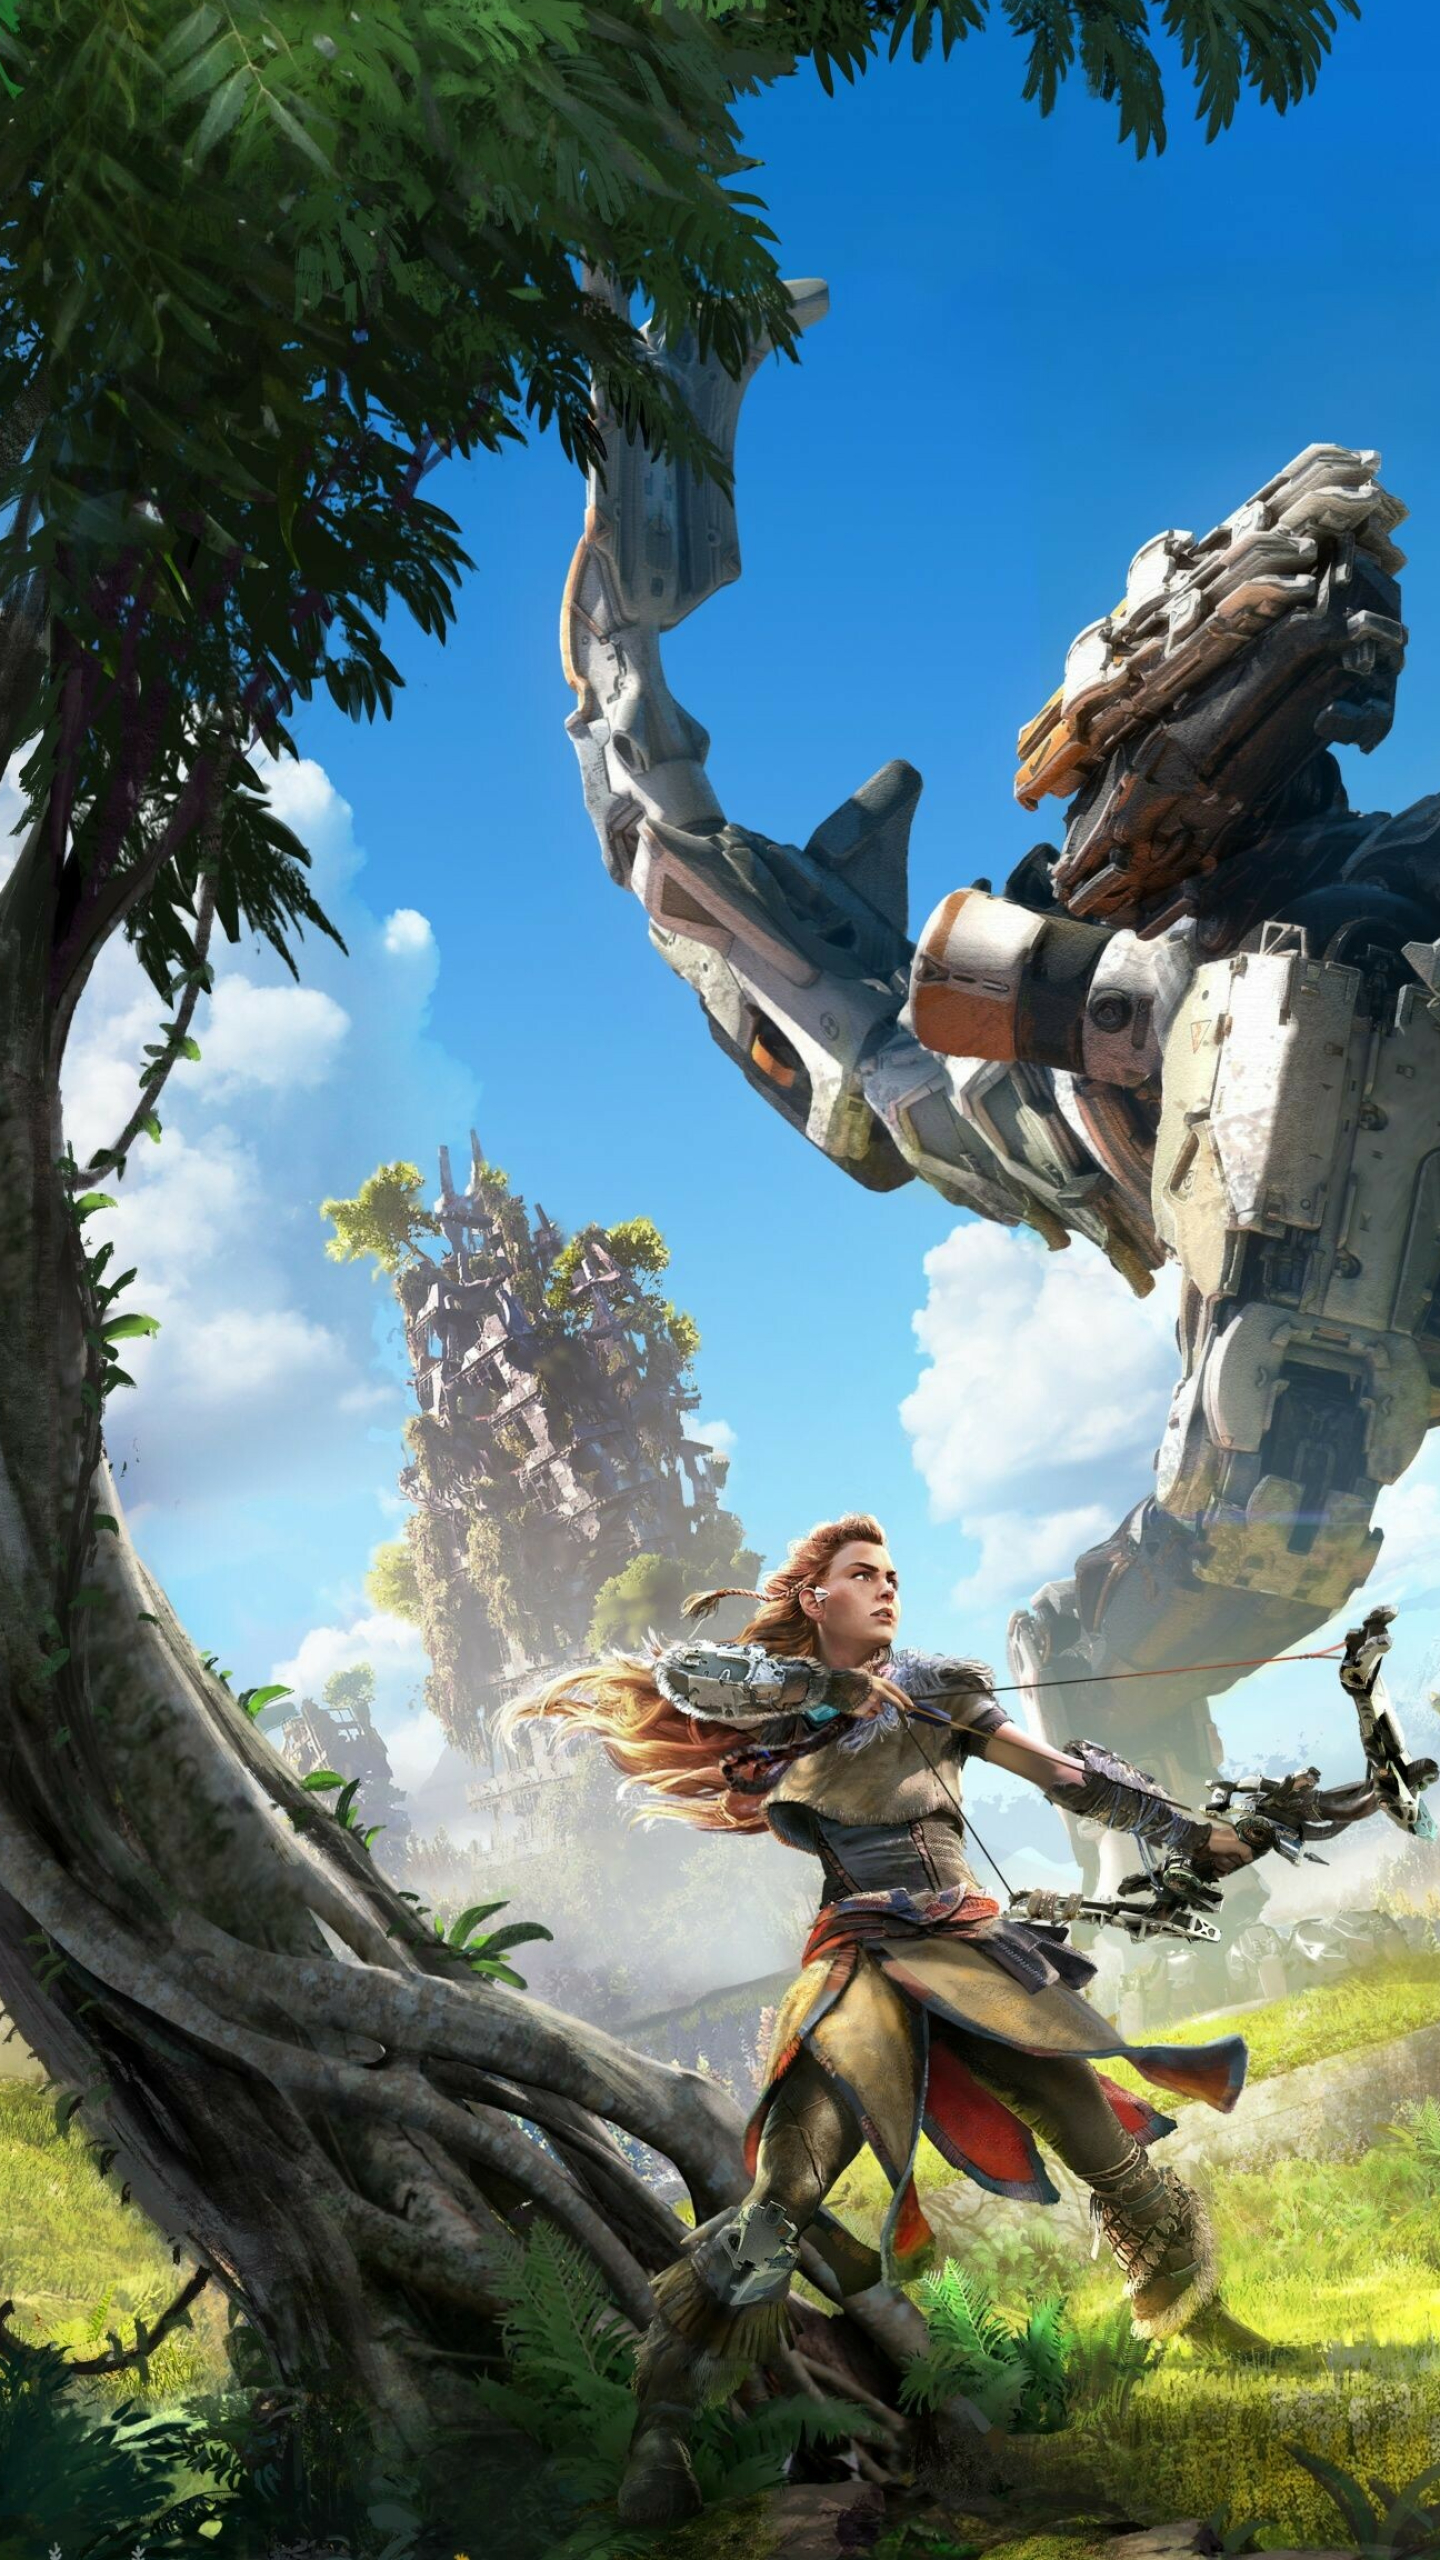 Horizon Zero Dawn: HZD, Published by Sony Interactive Entertainment. 1440x2560 HD Wallpaper.